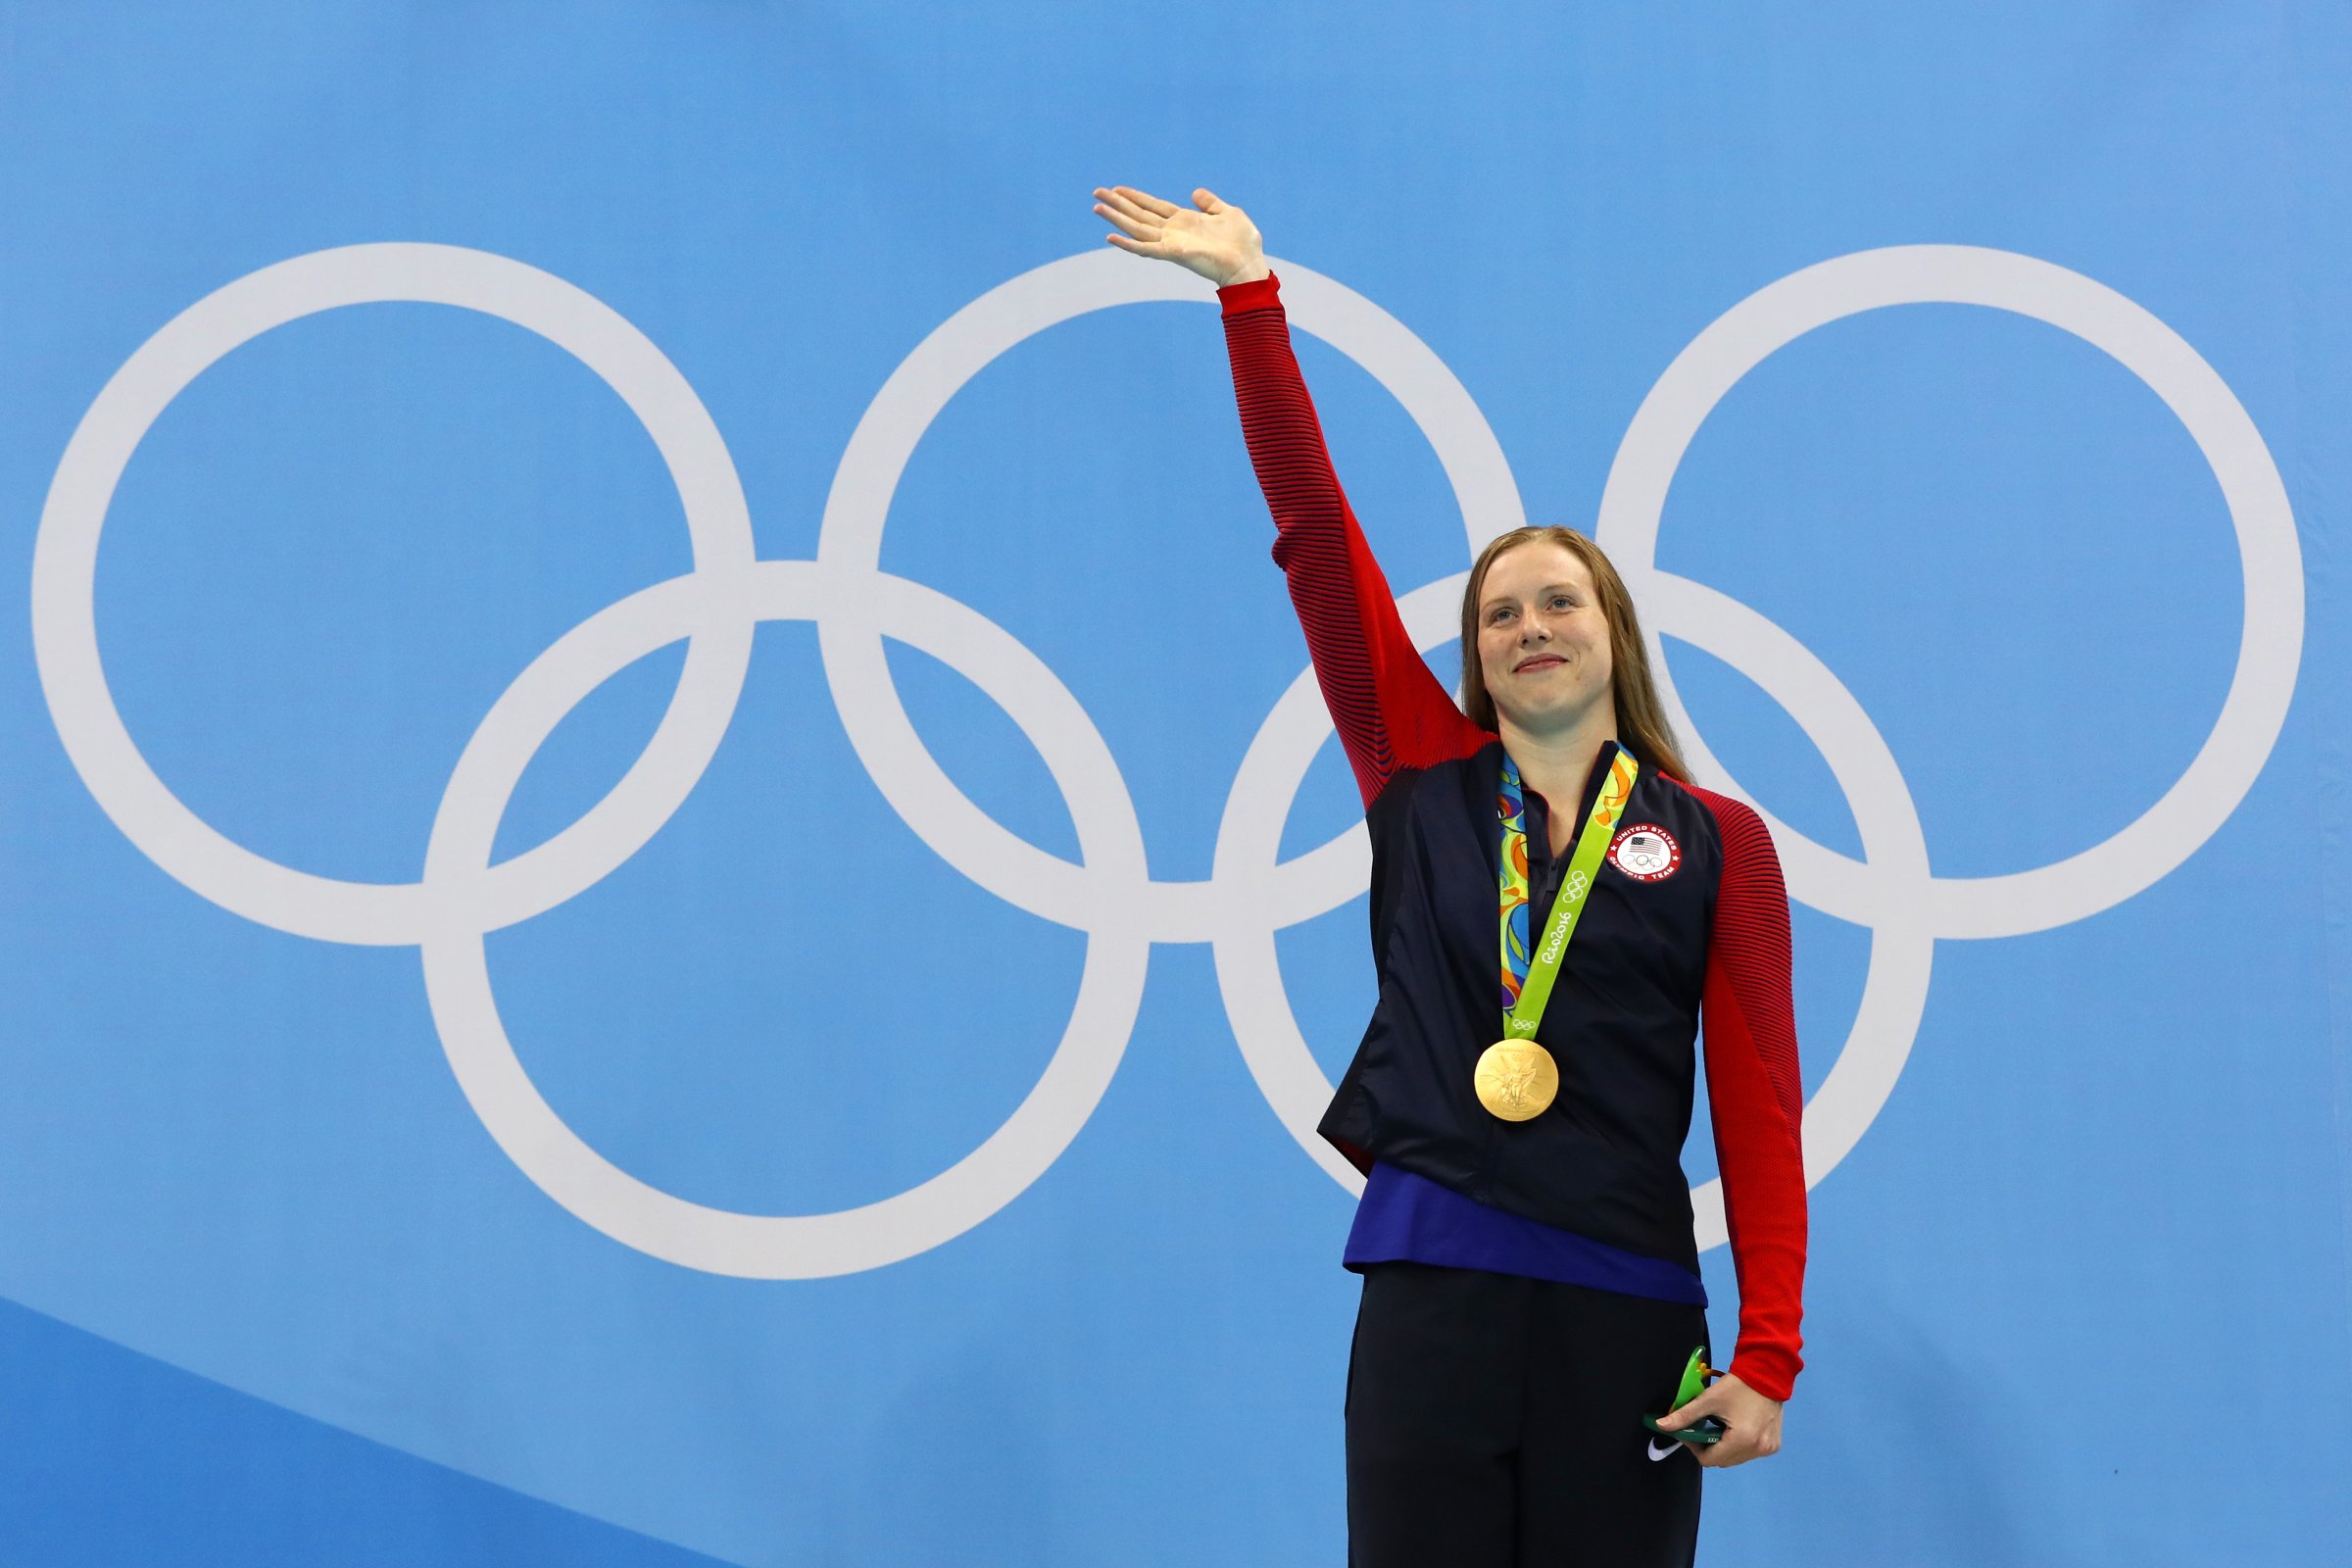 Gold medalist Lilly King of the United States poses during the medal ceremony for the Women's 100m Breaststroke Final on Day 3 of the Rio 2016 Olympic Games at the Olympic Aquatics Stadium in Rio de Janeiro on Aug. 8, 2016.